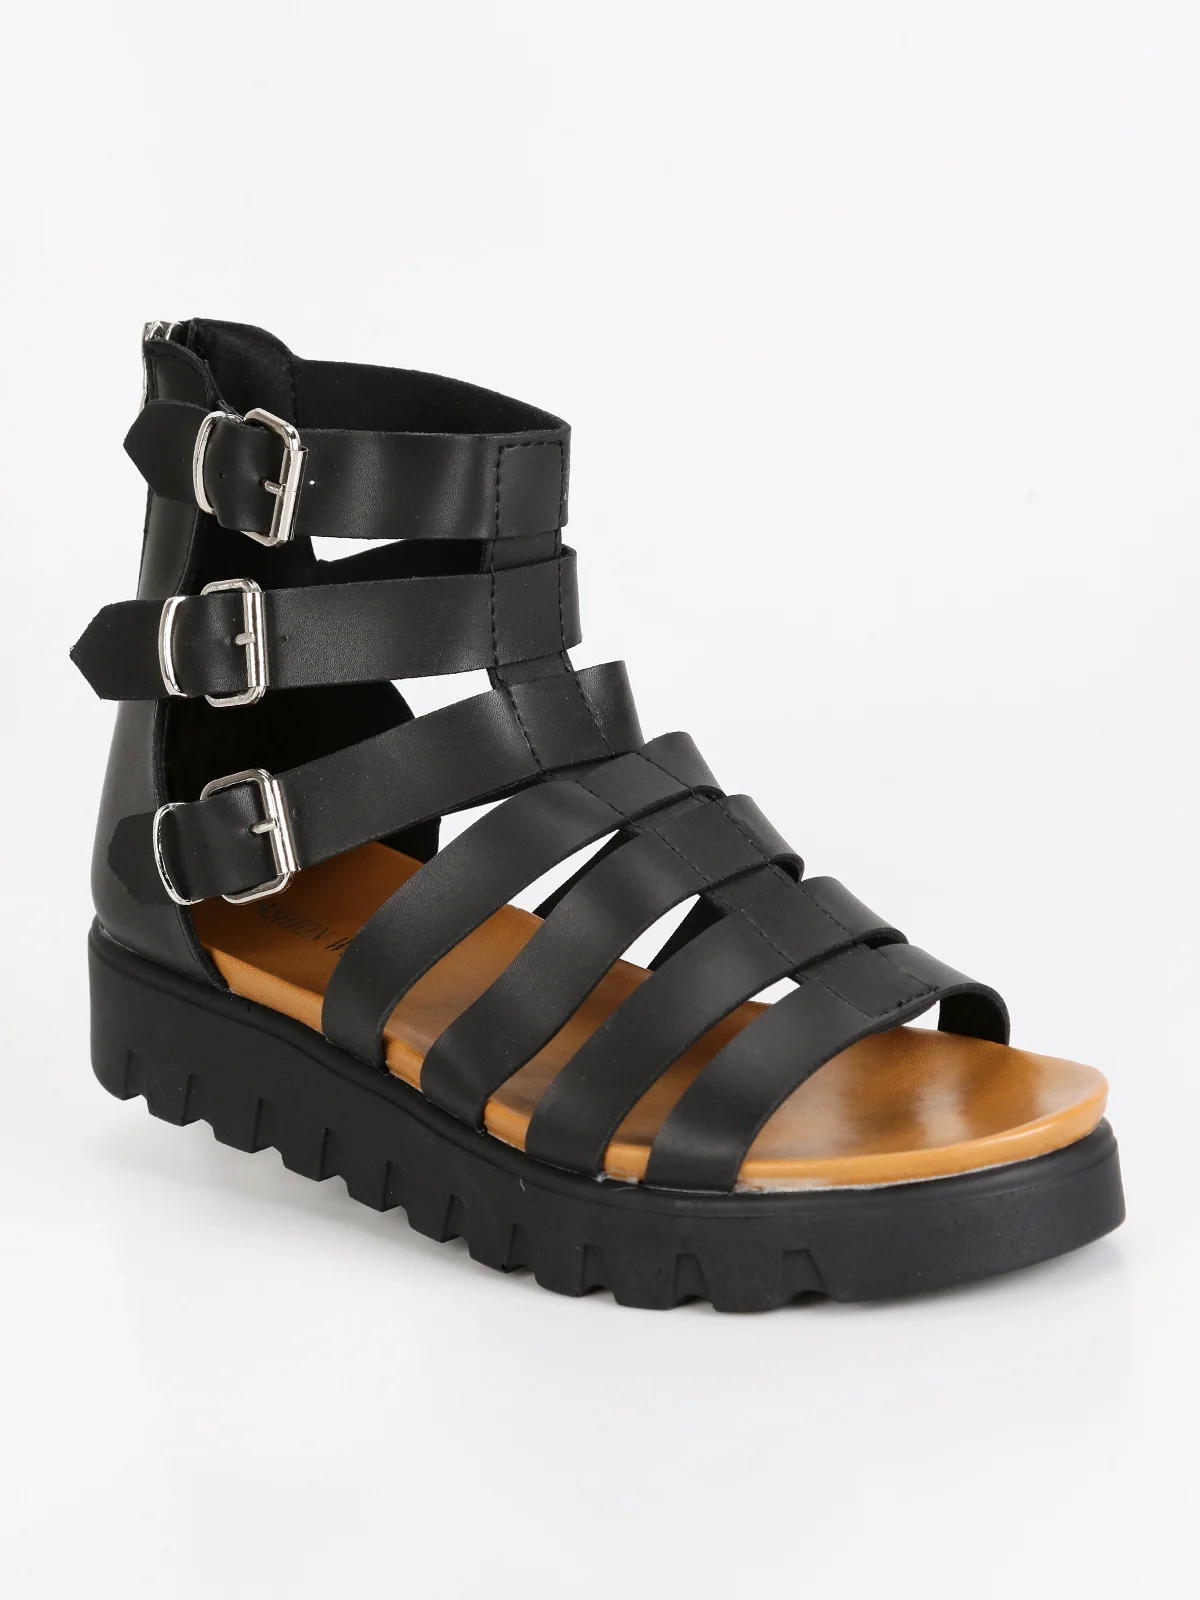 Sandals with buckles and Platform-in Women's Sandals from Shoes on ...